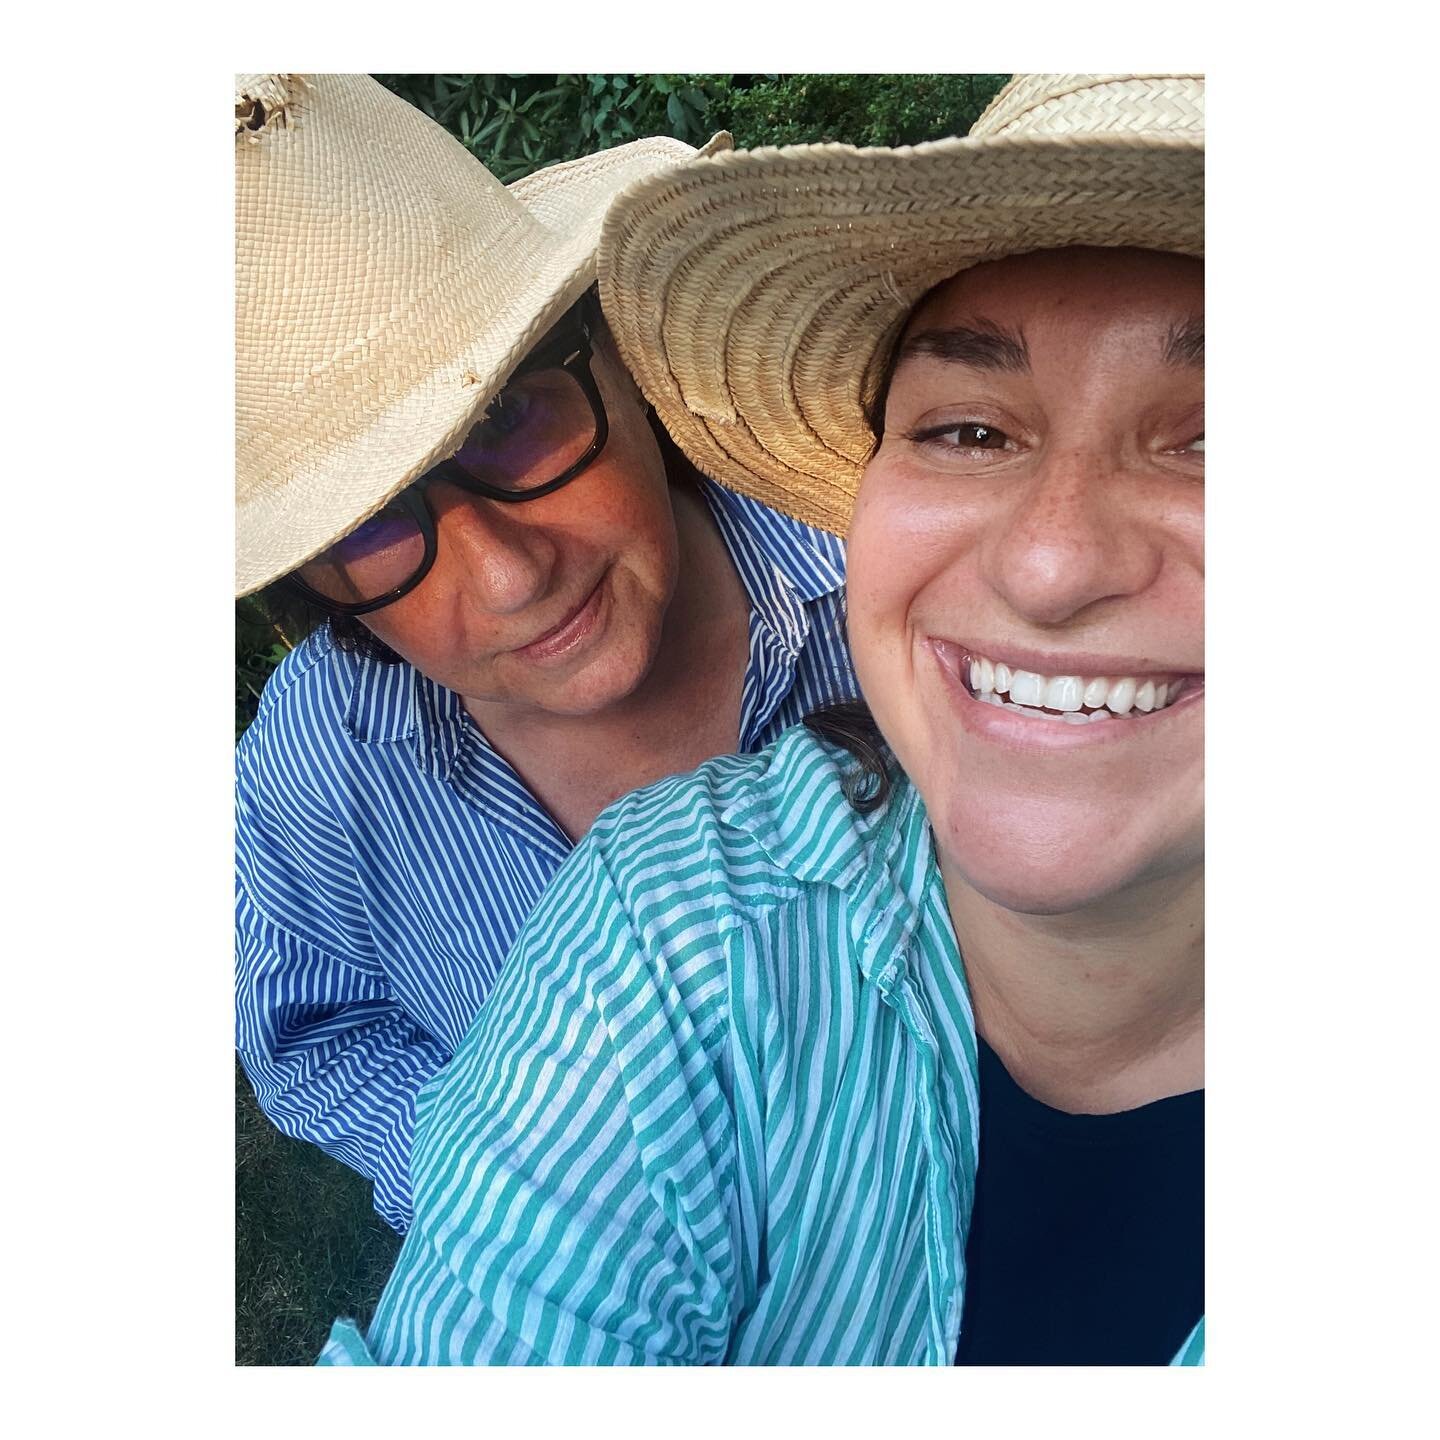 the DNA is evident when you are separated by hundreds of miles yet show up on the same day in Essex, twinning in our summer uniforms - straw hat, striped shirt, white jeans + berks. scary strong. 

LAST PLEA FOR SUPPORT:  6 days to go till this wicke